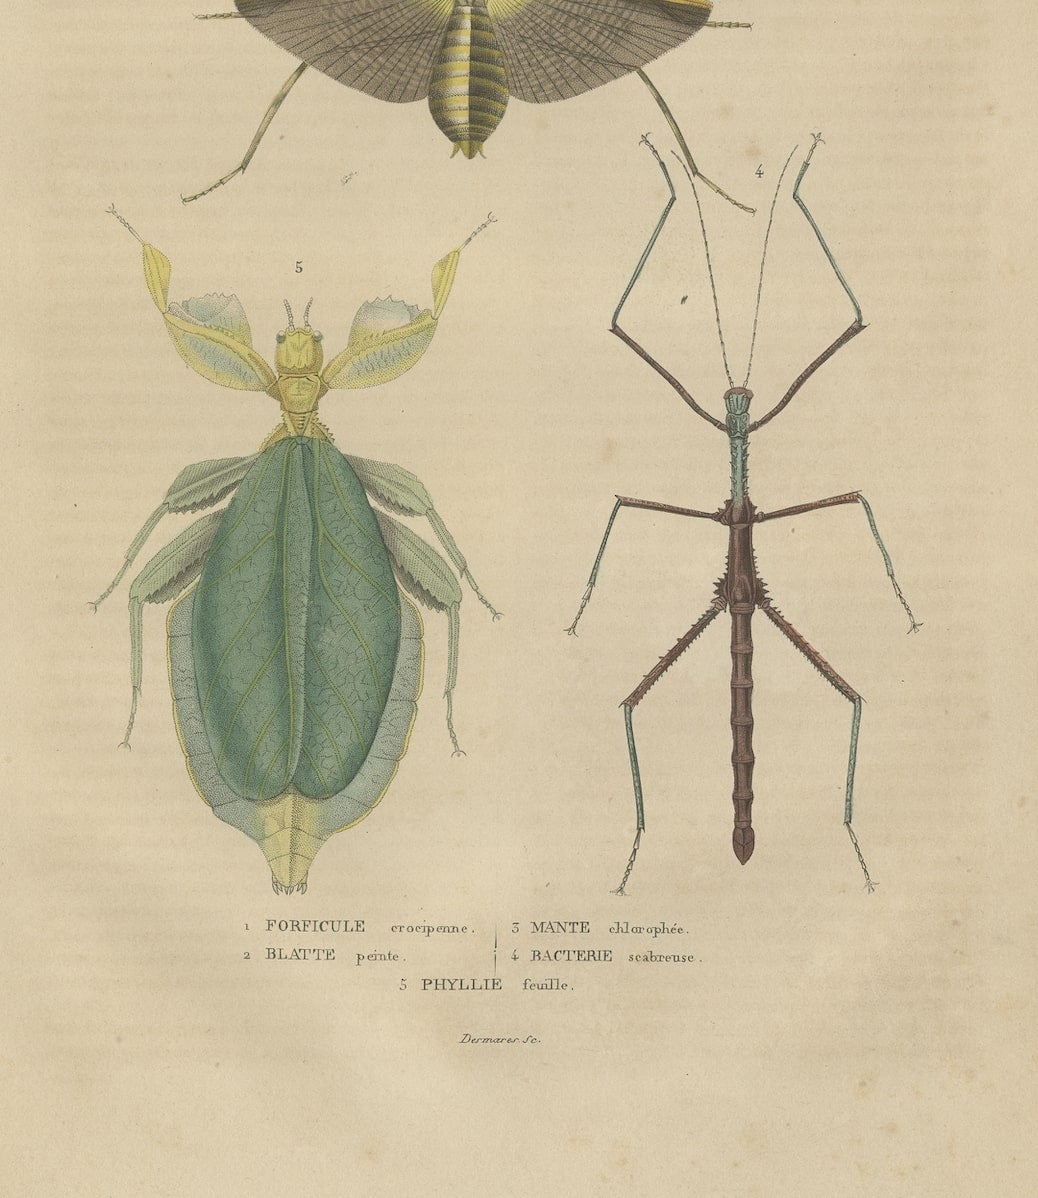 An antique hand-colored print by Pierre Auguste Joseph Drapiez, a Belgian naturalist and artist. The print contains depictions of various insects and microorganisms:

1. **Forficule crocipenne:** This refers to a species of earwig. 